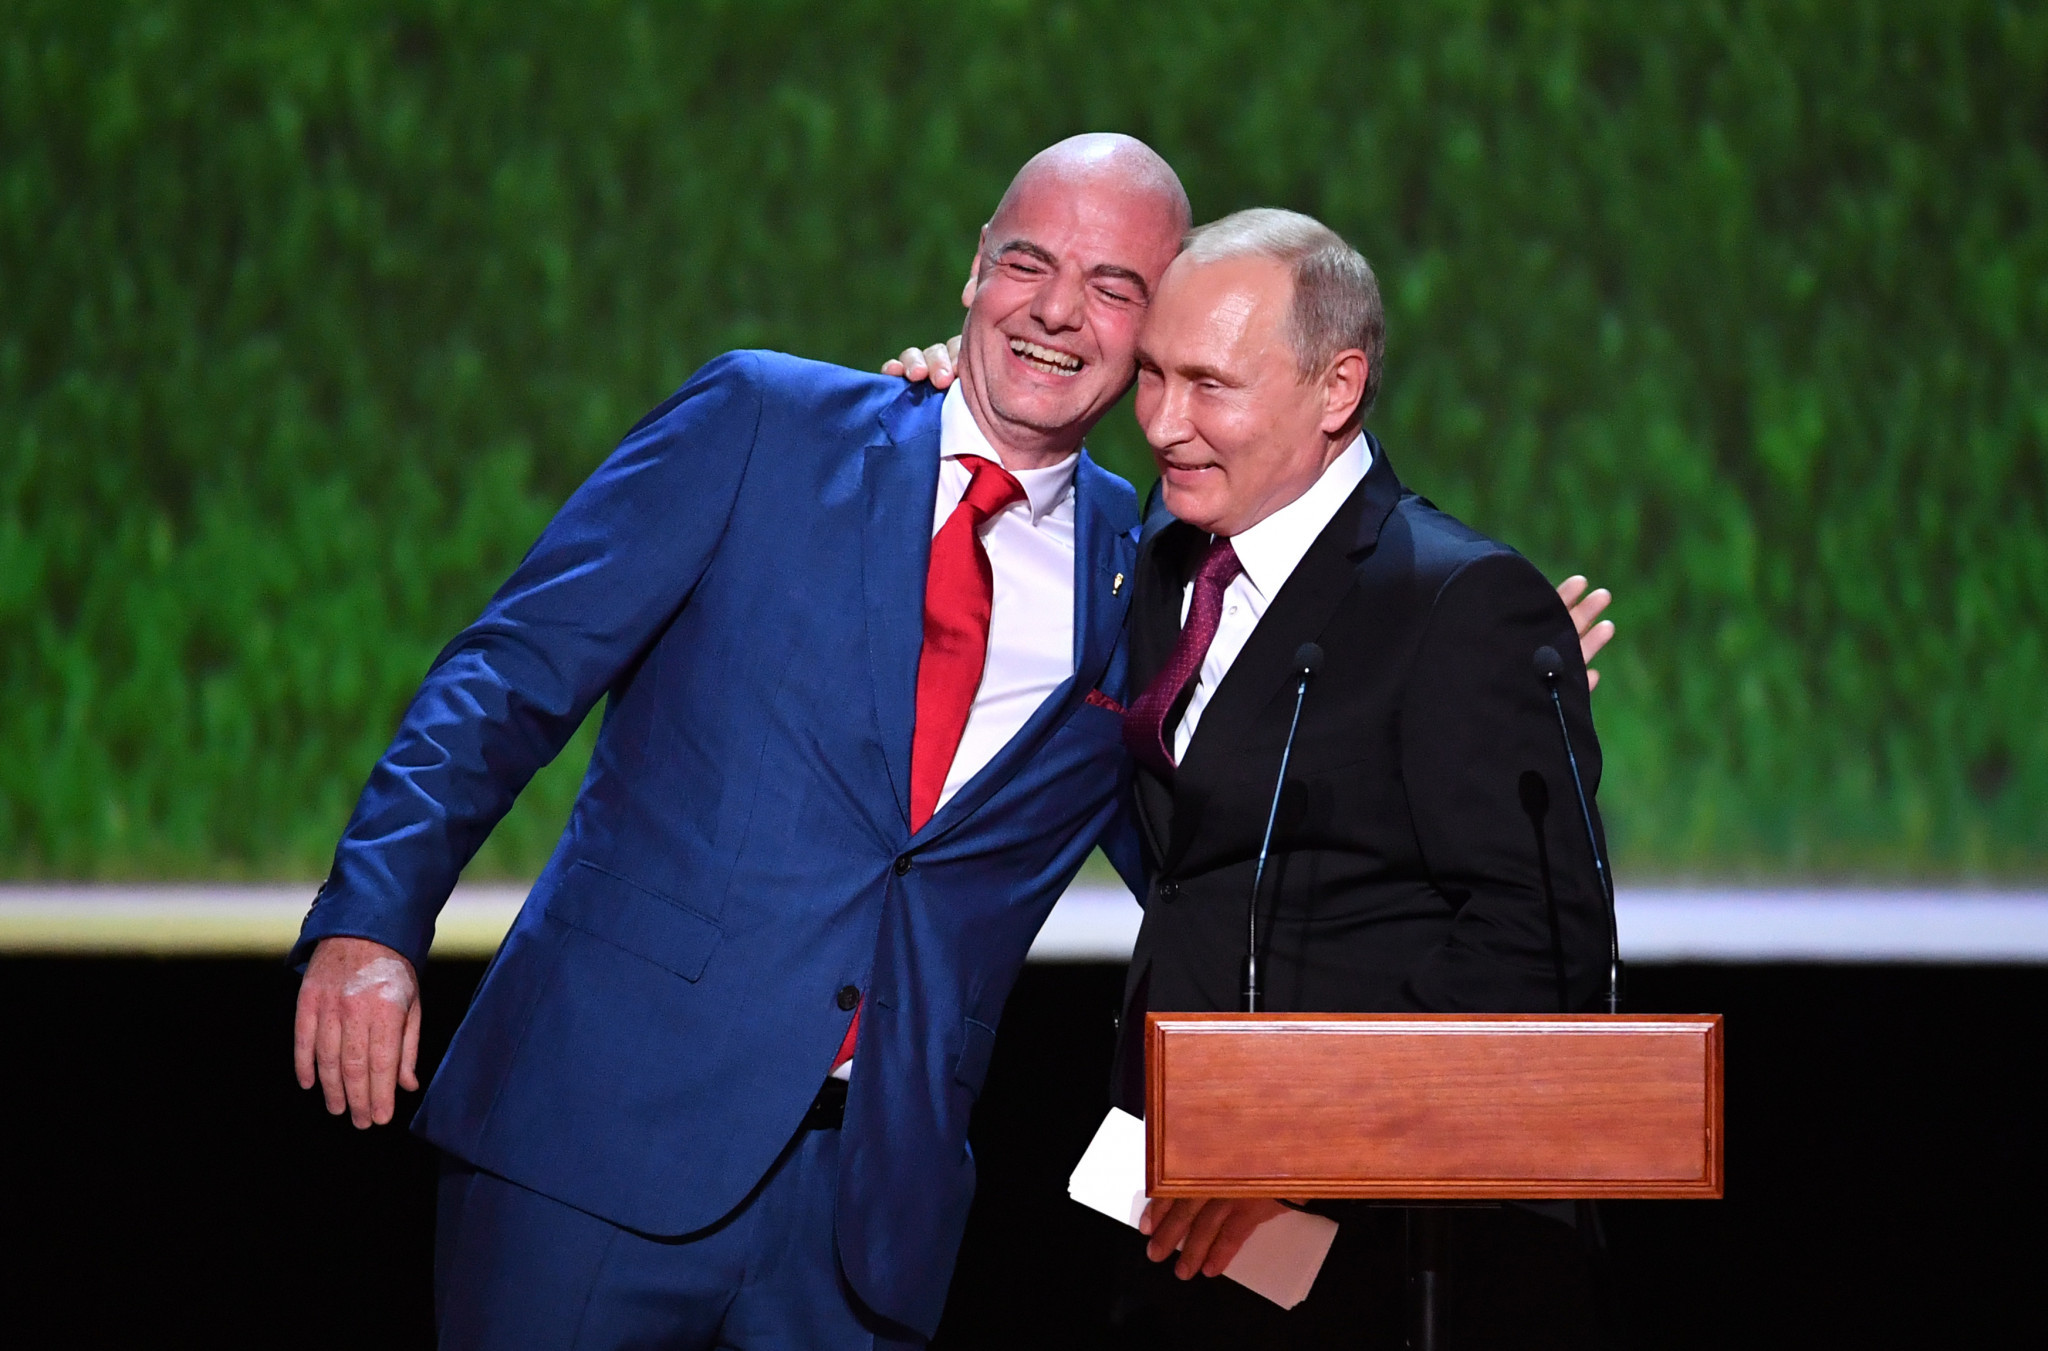 FIFA President Gianni Infantino, left, has faced criticism over his relationship with Russian leader Vladimir Putin ©Getty Images